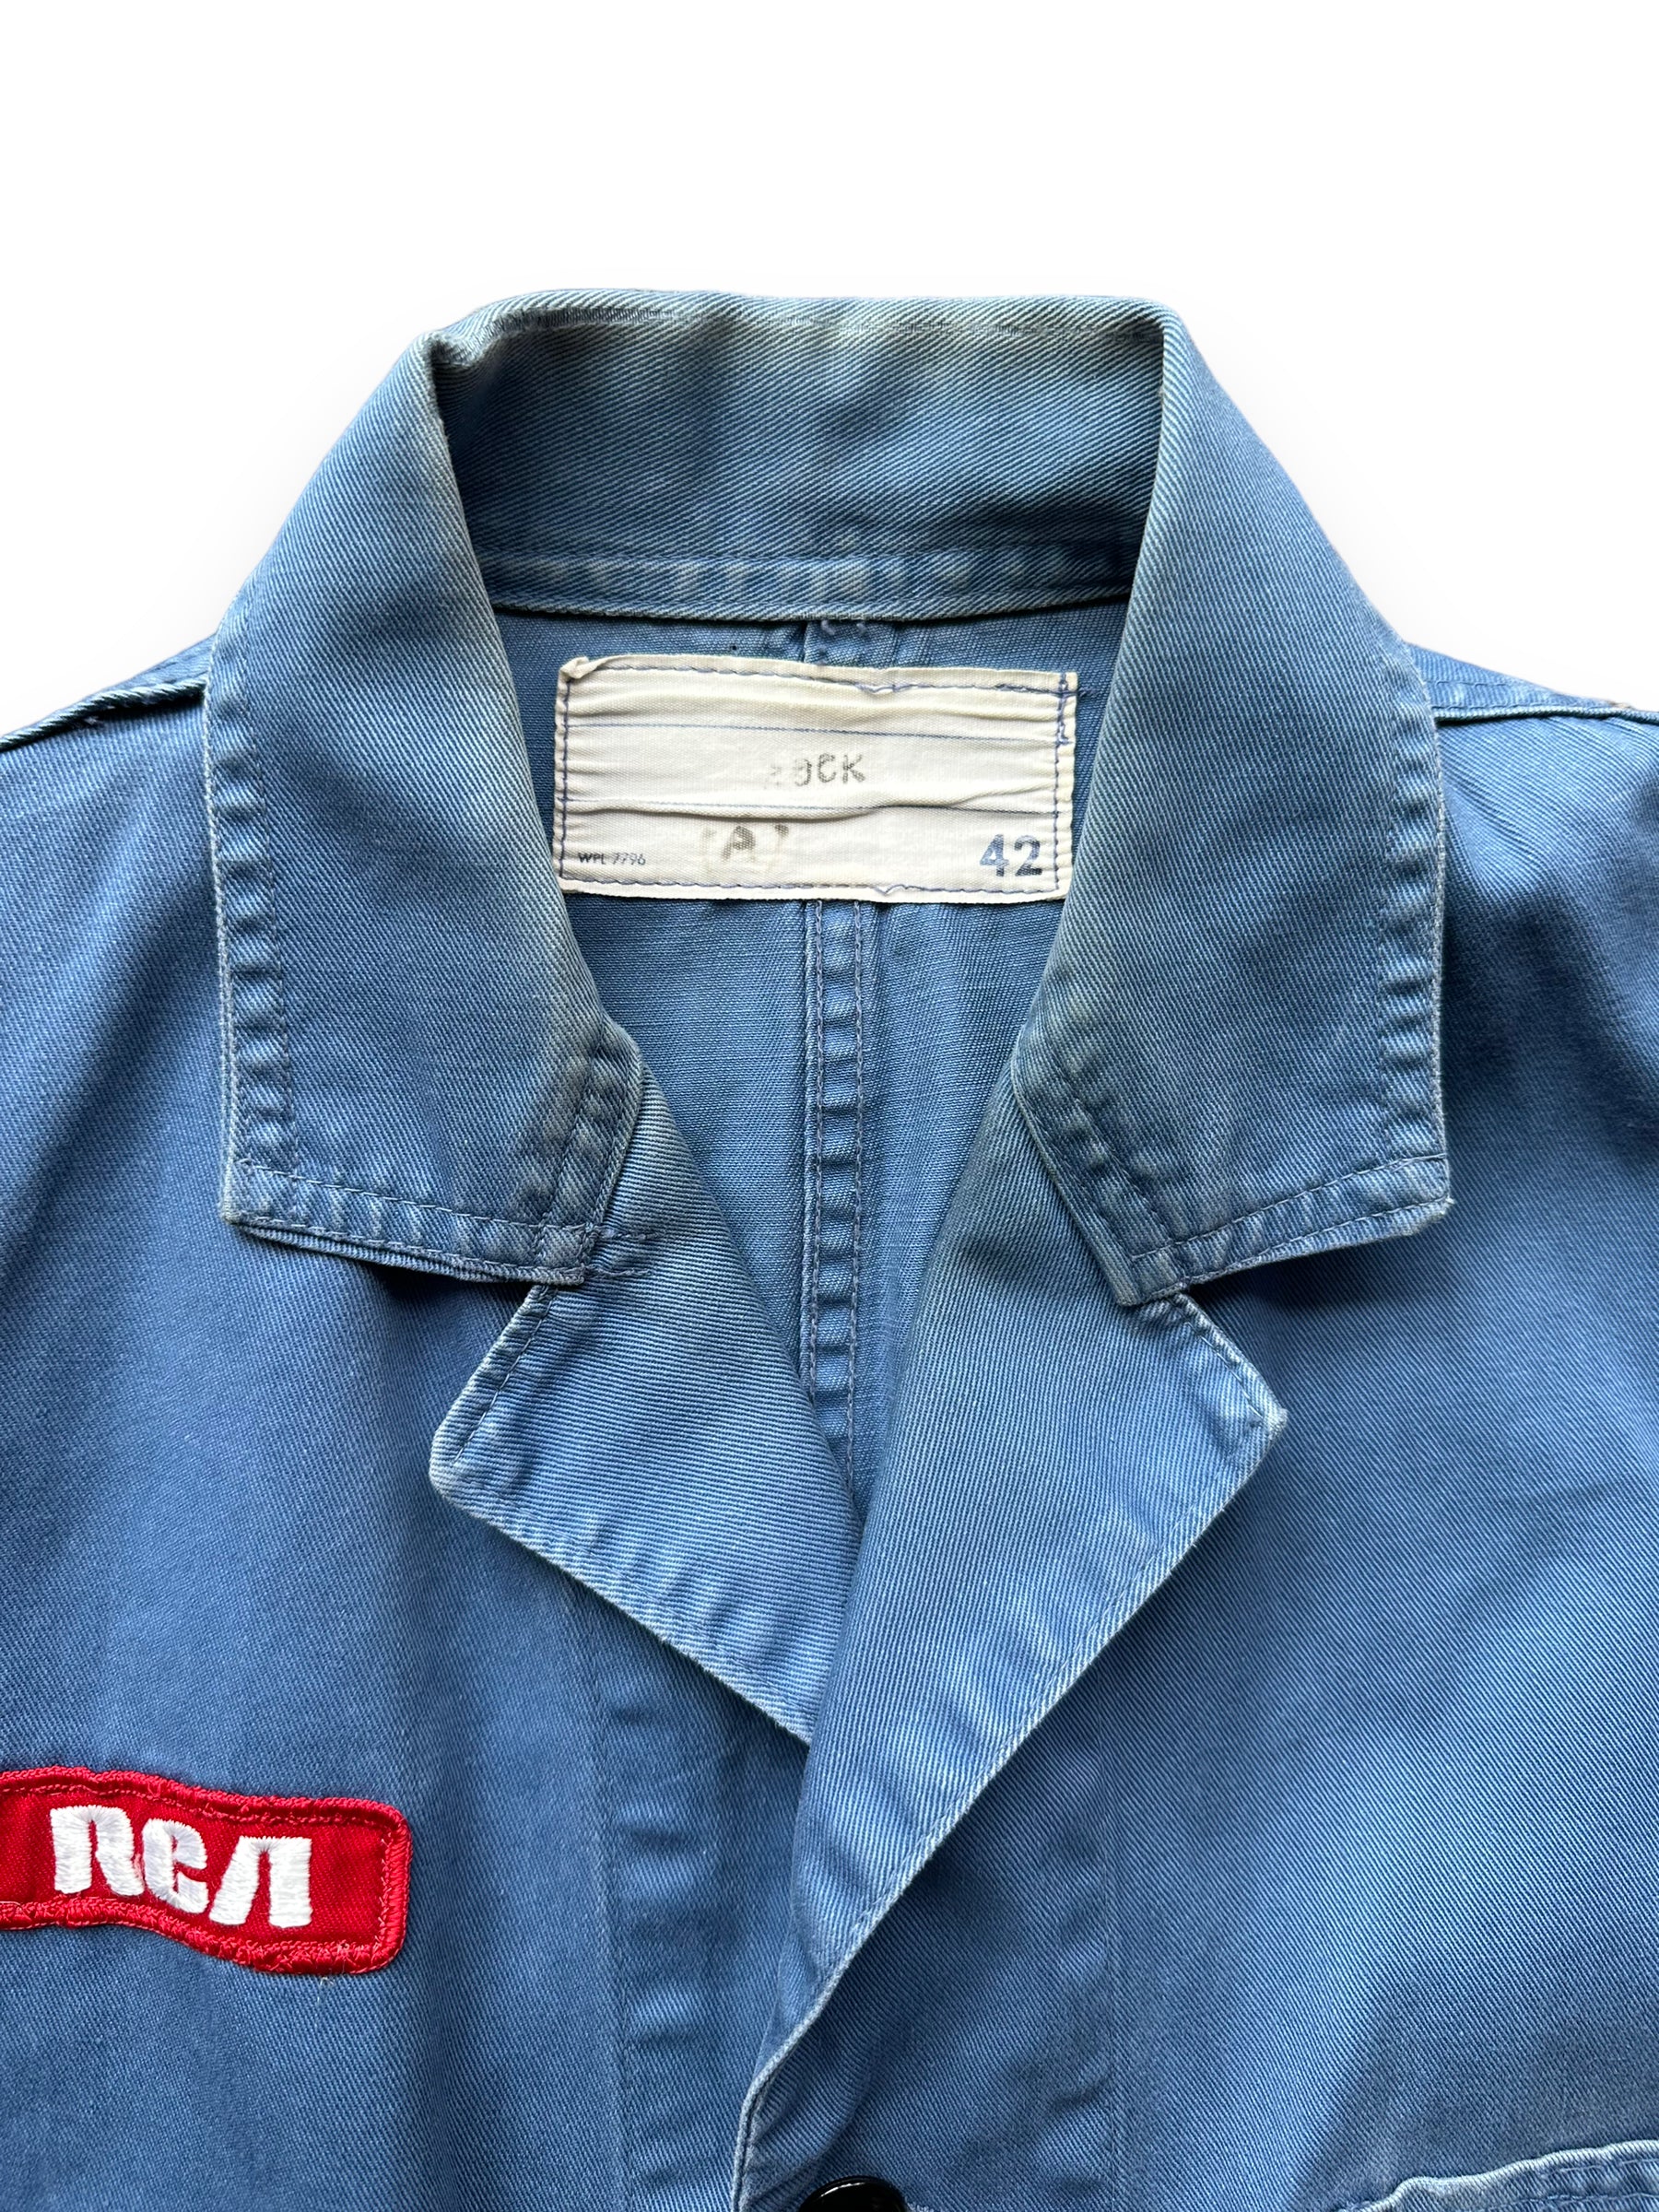 Tag View of Vintage RCA TV Repair Shop Coat SZ XL | French Workwear Seattle | Barn Owl Vintage Goods Seattle